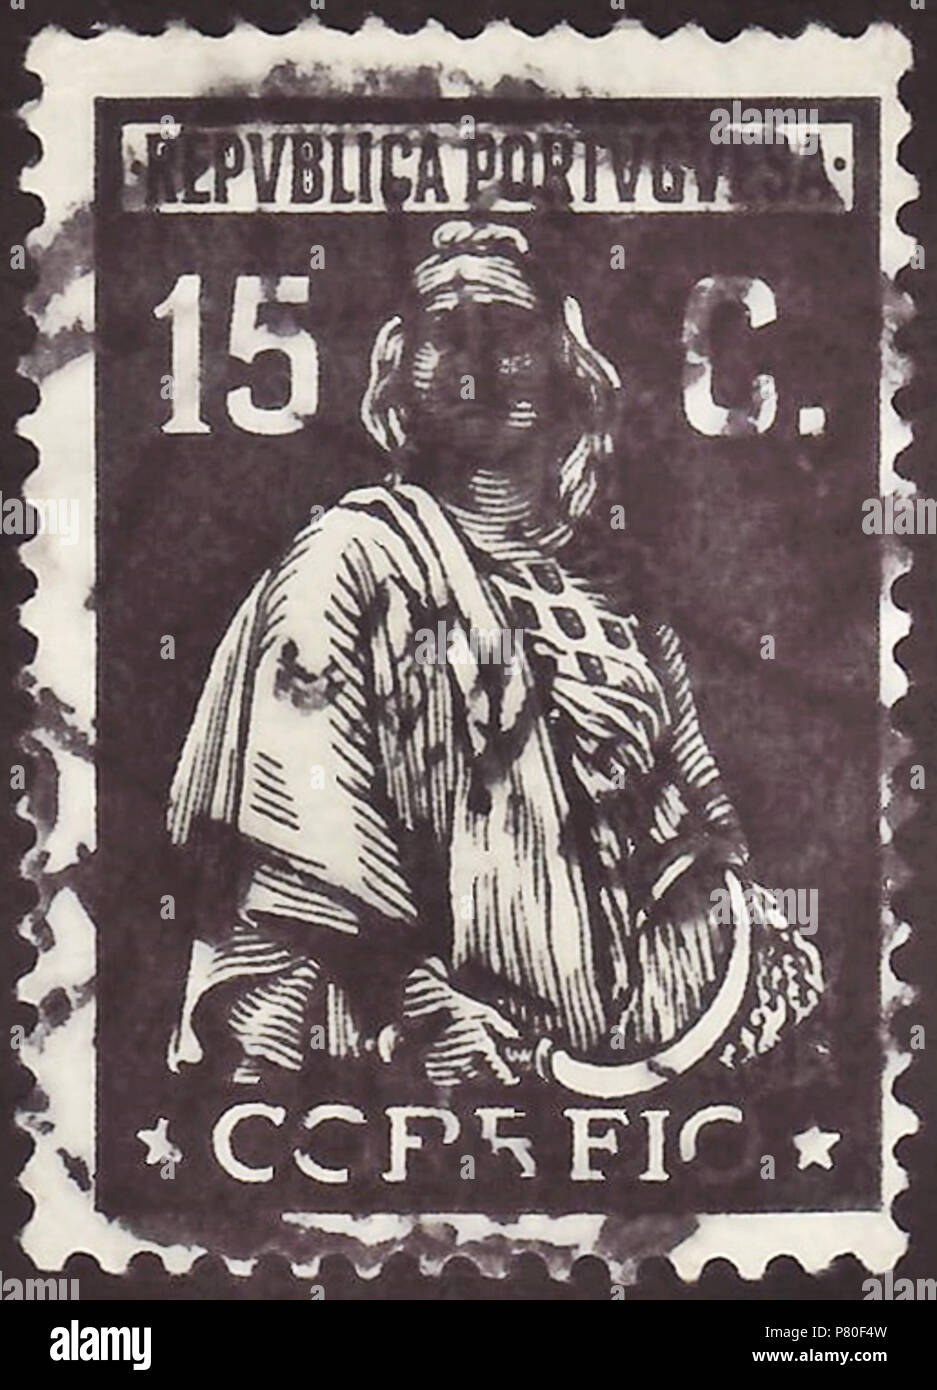 Stamp of Portugal; 1926; definitive stamp of the issue 'Ceres - 1st London issue'; new values and colors after the military coup in Portugal, 1926, printed in London (printery 'Thomas De La Rue & Company, Limited') according to the former design template; stamp drawing without signature line; stamp postmarked in 1928 Stamp: Michel: No. 412; Yvert et Tellier: No. 420; AFA: No. 414 Color: black on normal paper Watermark: none Nominal value: 15 C. (Centavos) Postage validity: from 2 December 1926 until 30 September 1945 Stamp picture size (printed area): 17.5 x 25.0 mm (no names line) . 2 Decembe Stock Photo